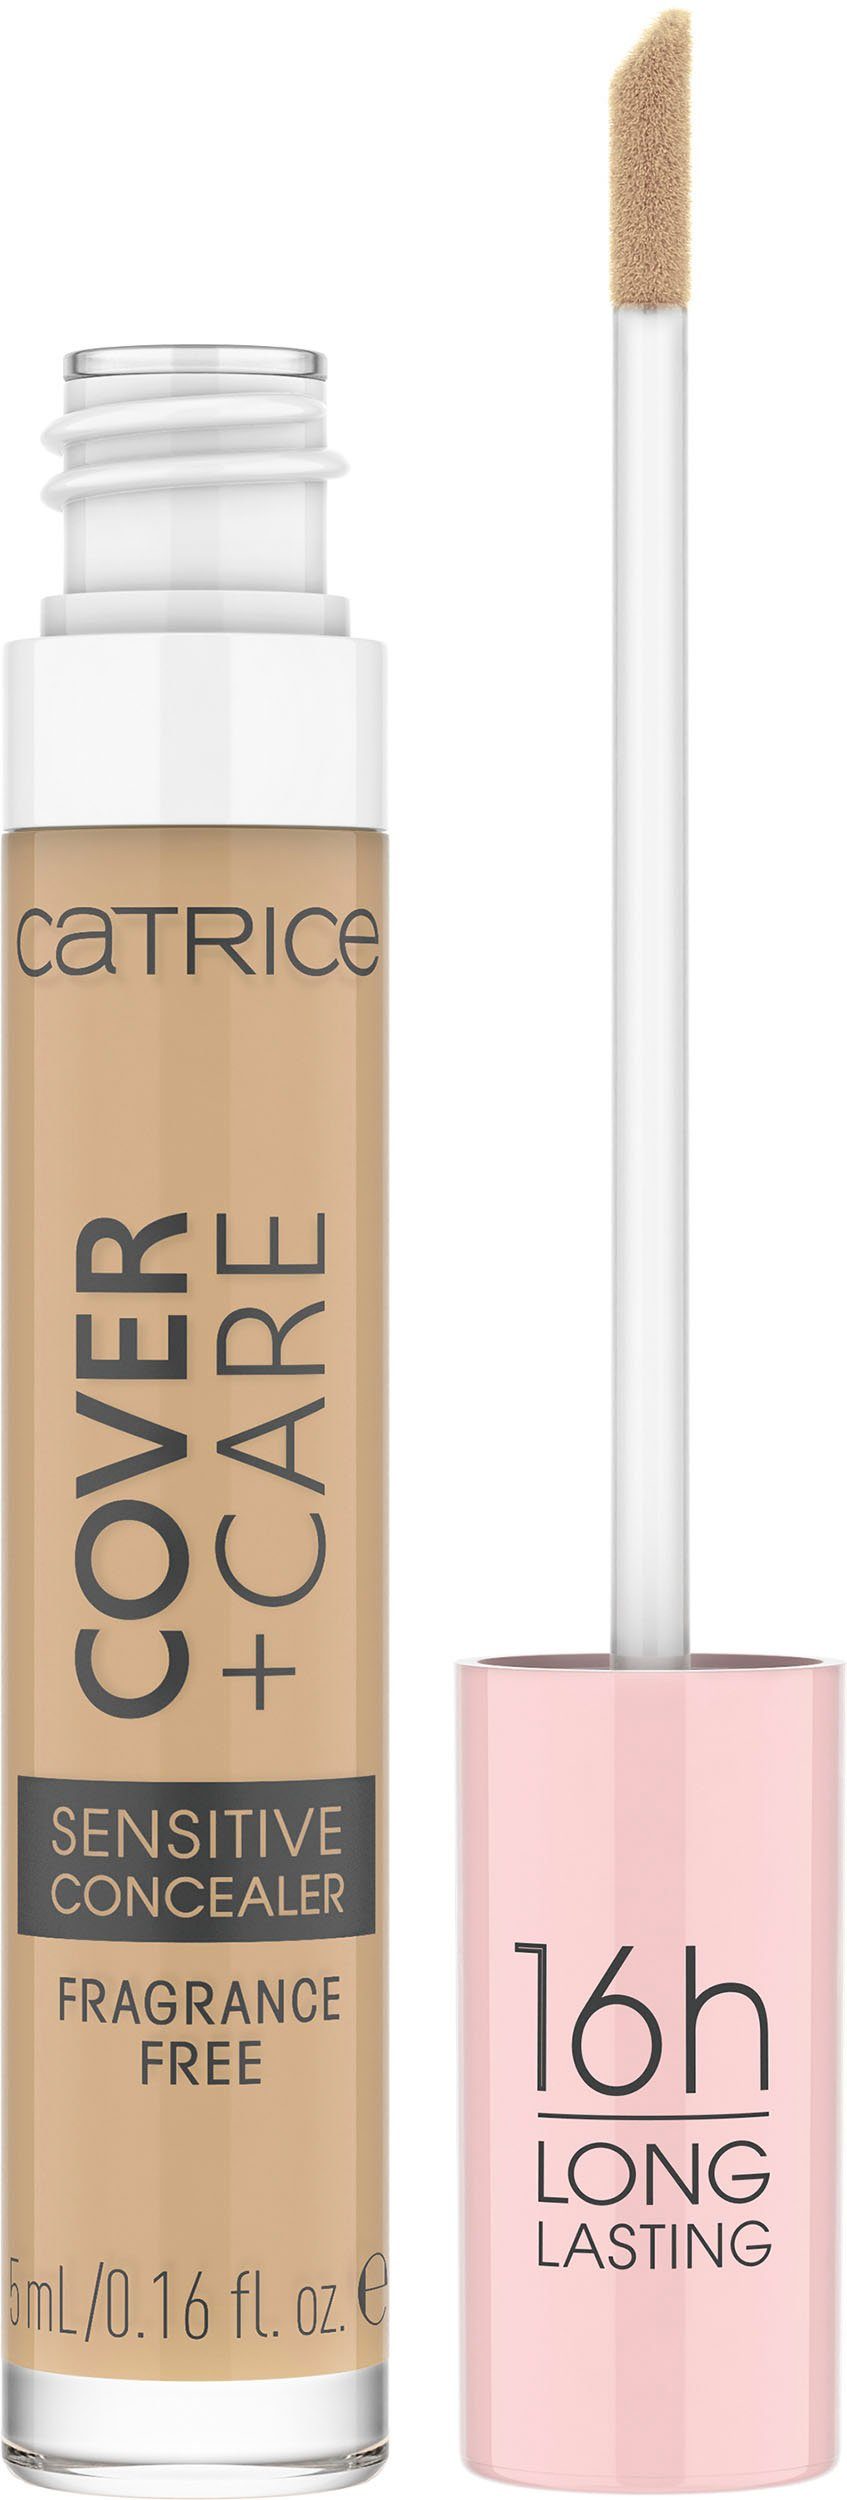 Catrice Care Catrice 030N + Concealer, Cover Concealer Sensitive 3-tlg. nude